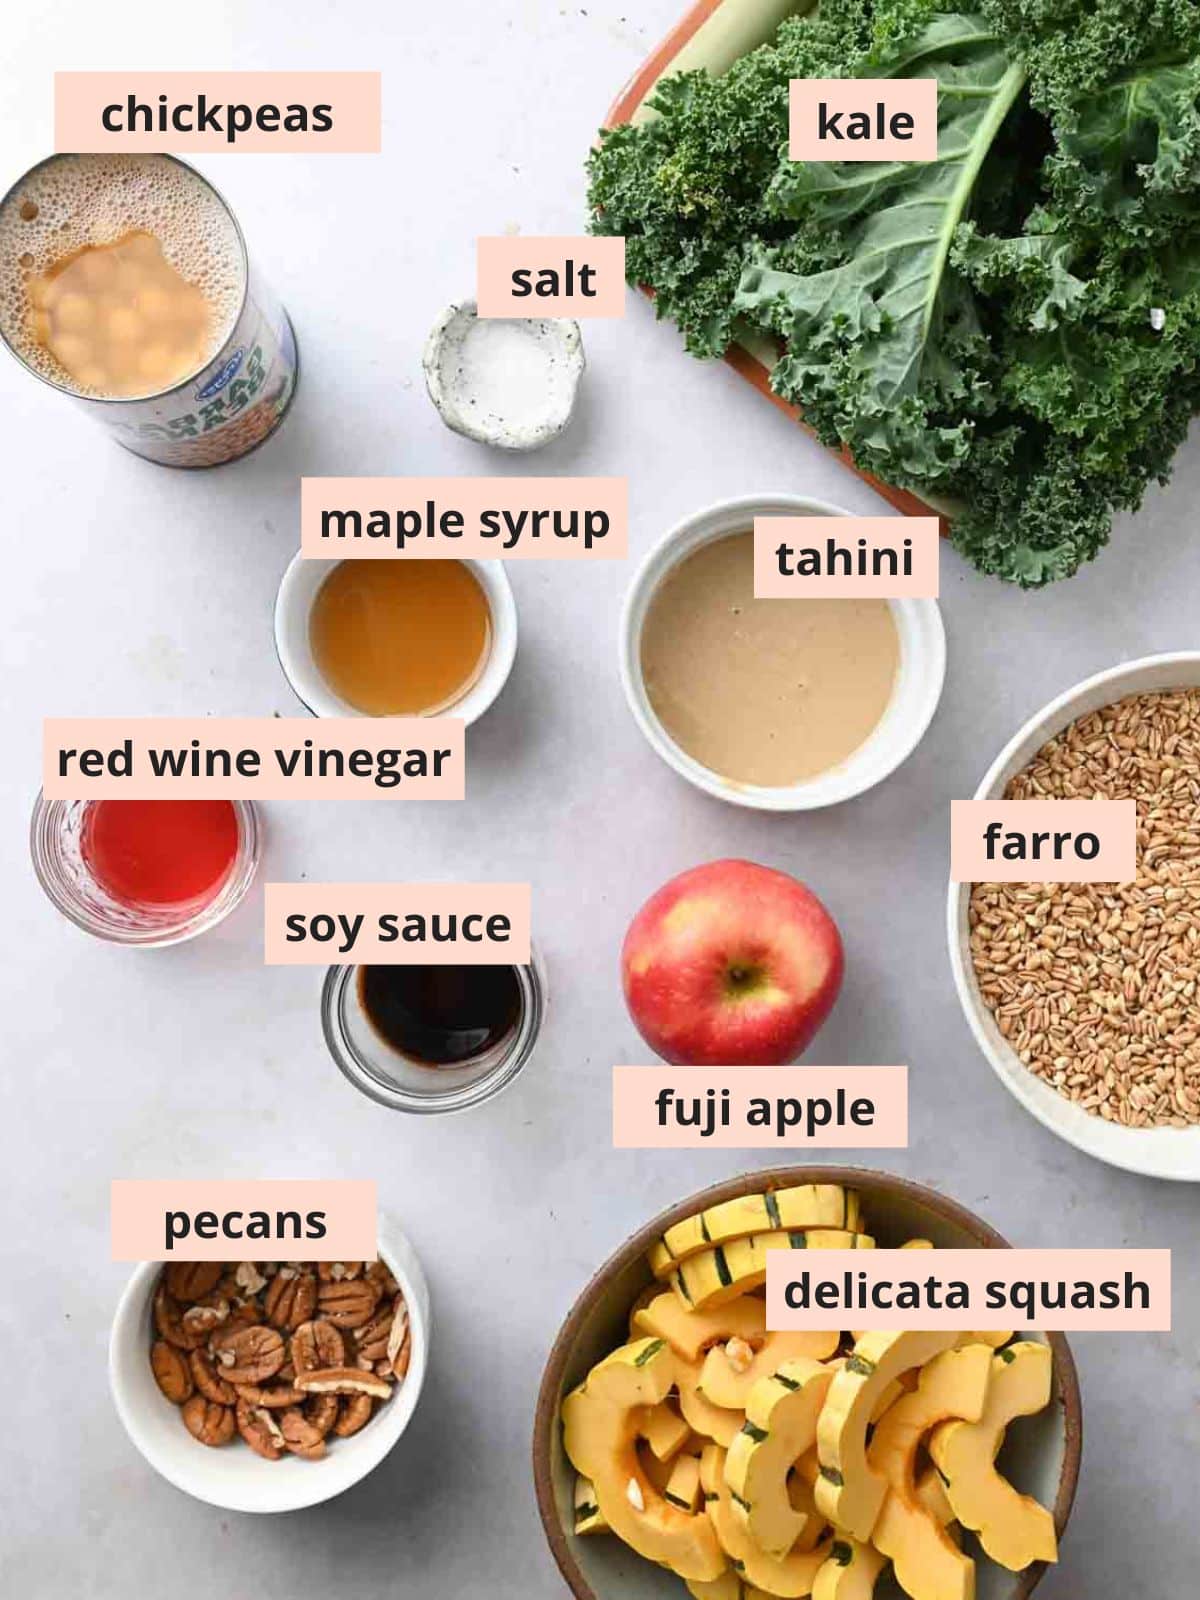 Labeled ingredients used to make grain bowls.